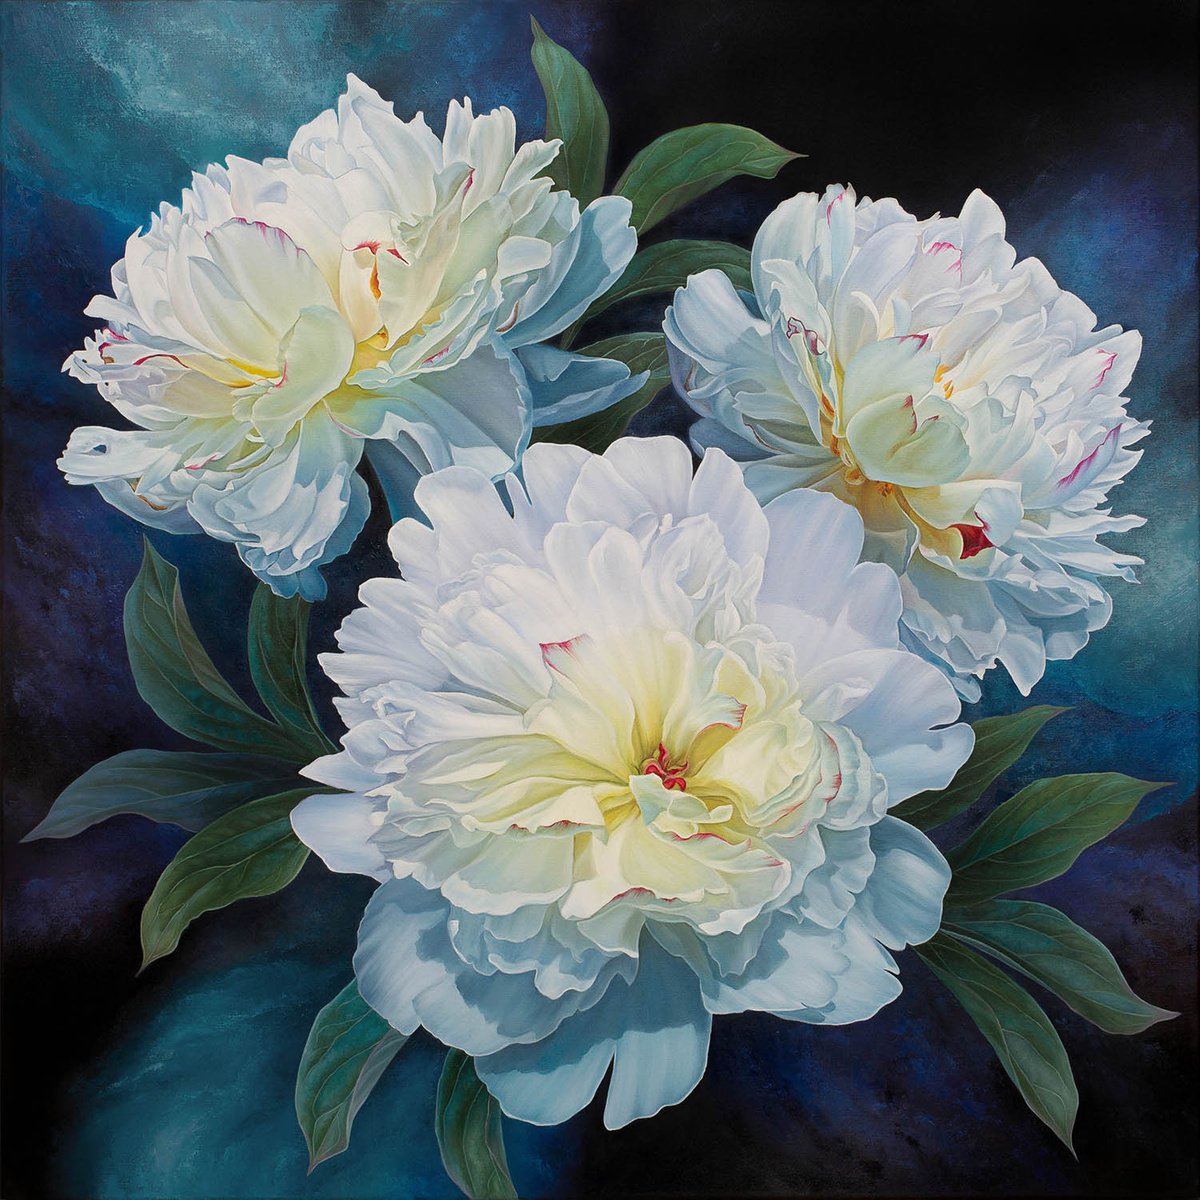 Magic of peonies, large oil floral painting, white flowers art by Anna Steshenko